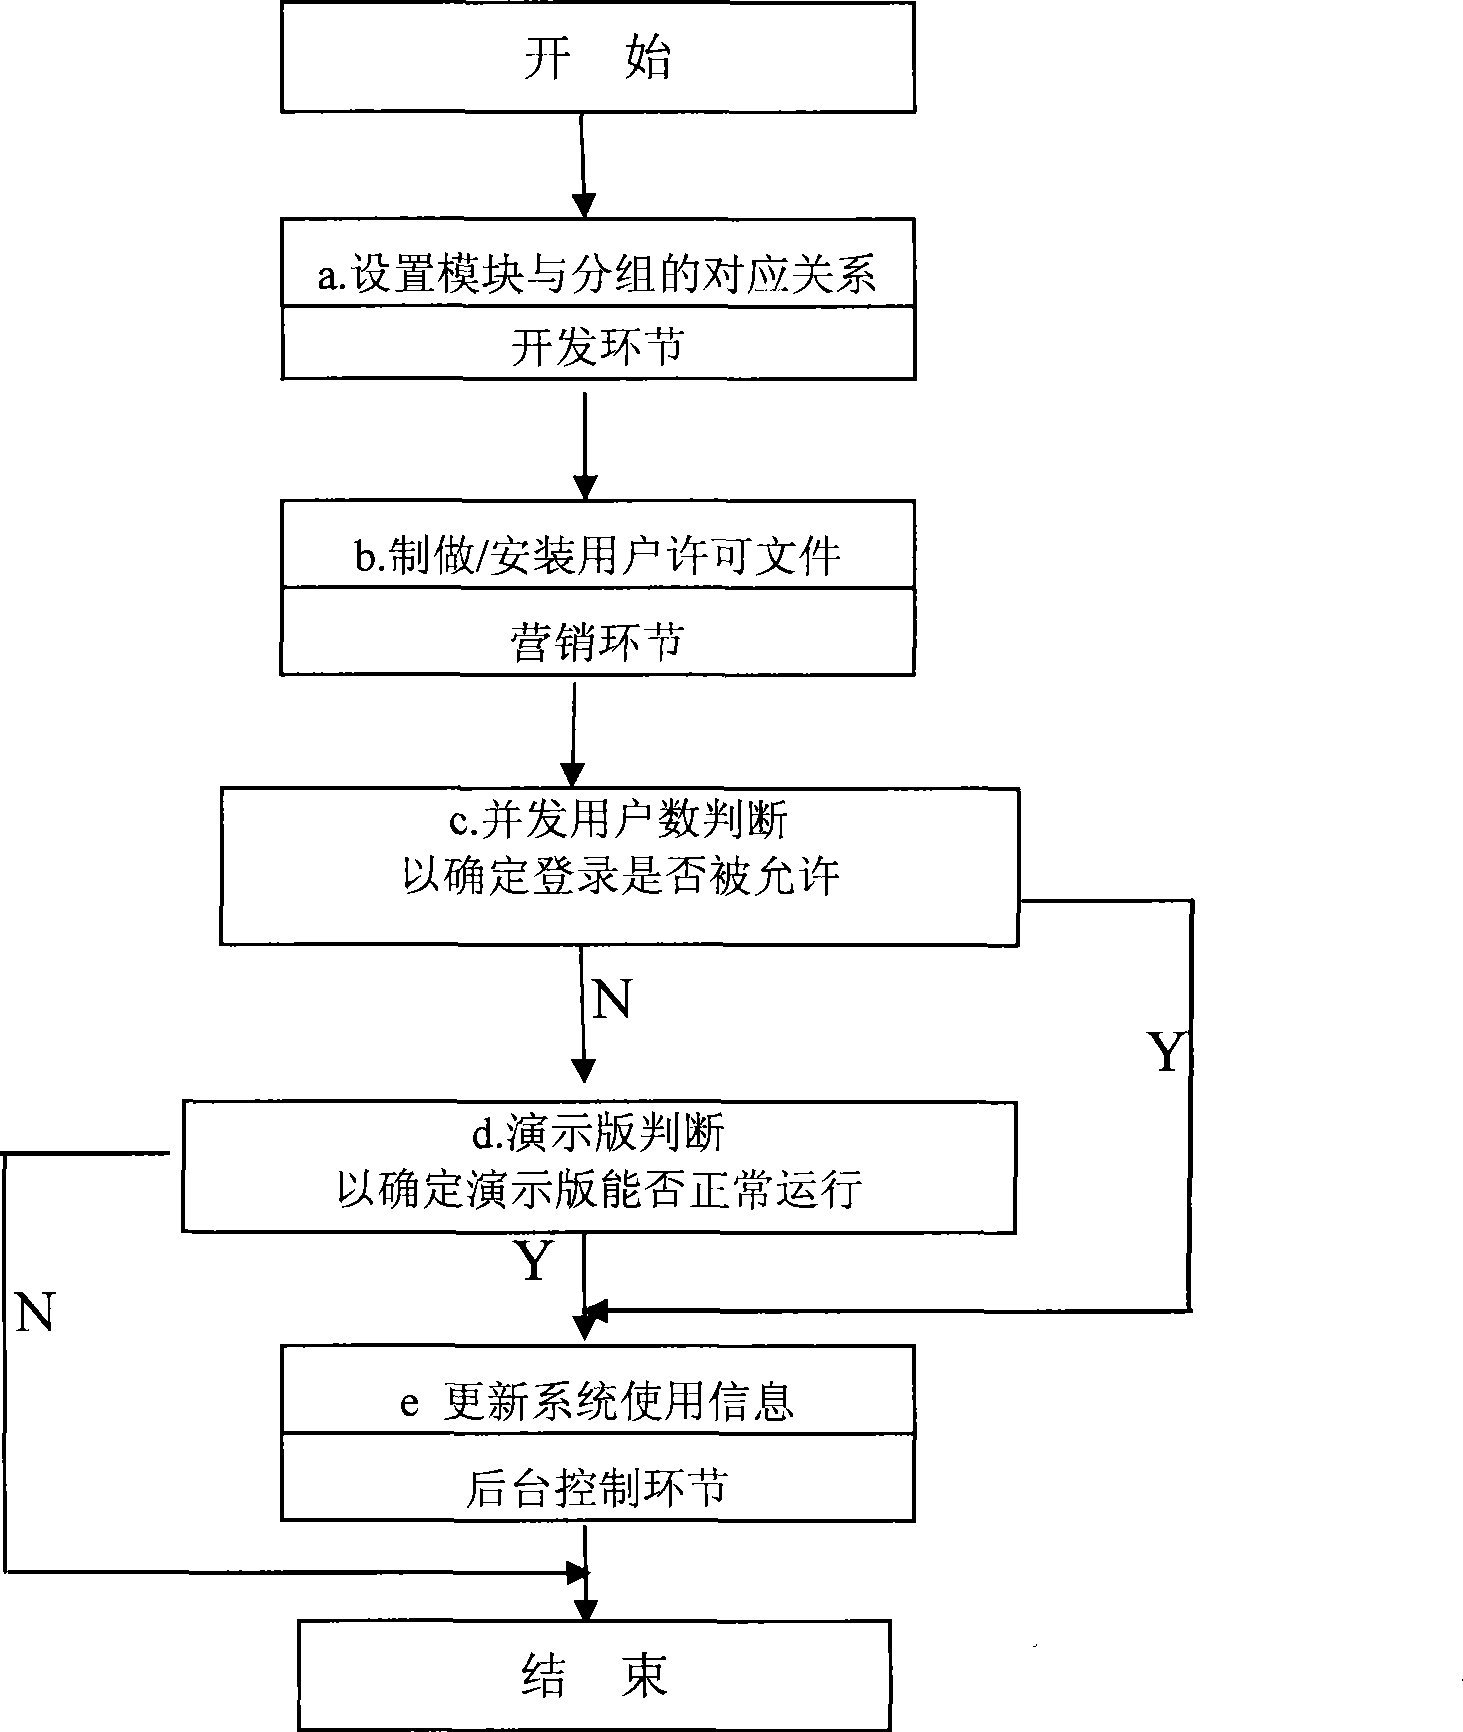 Method and system for controlling concurrency user number